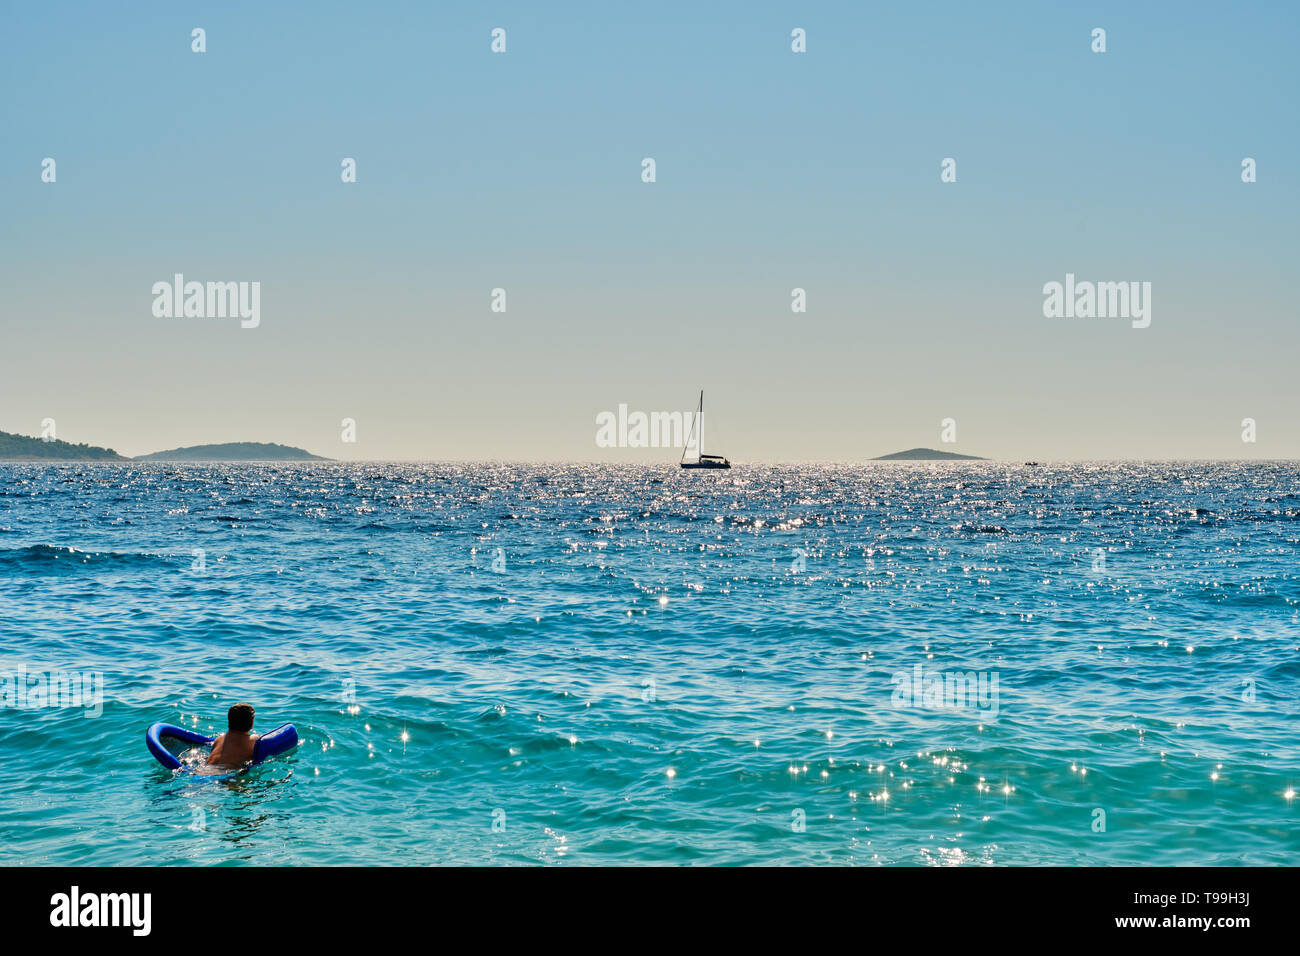 Man floating on air mattress, looking at the sailing boat in the distance in Primosten, Dalmatia, Croatia Stock Photo